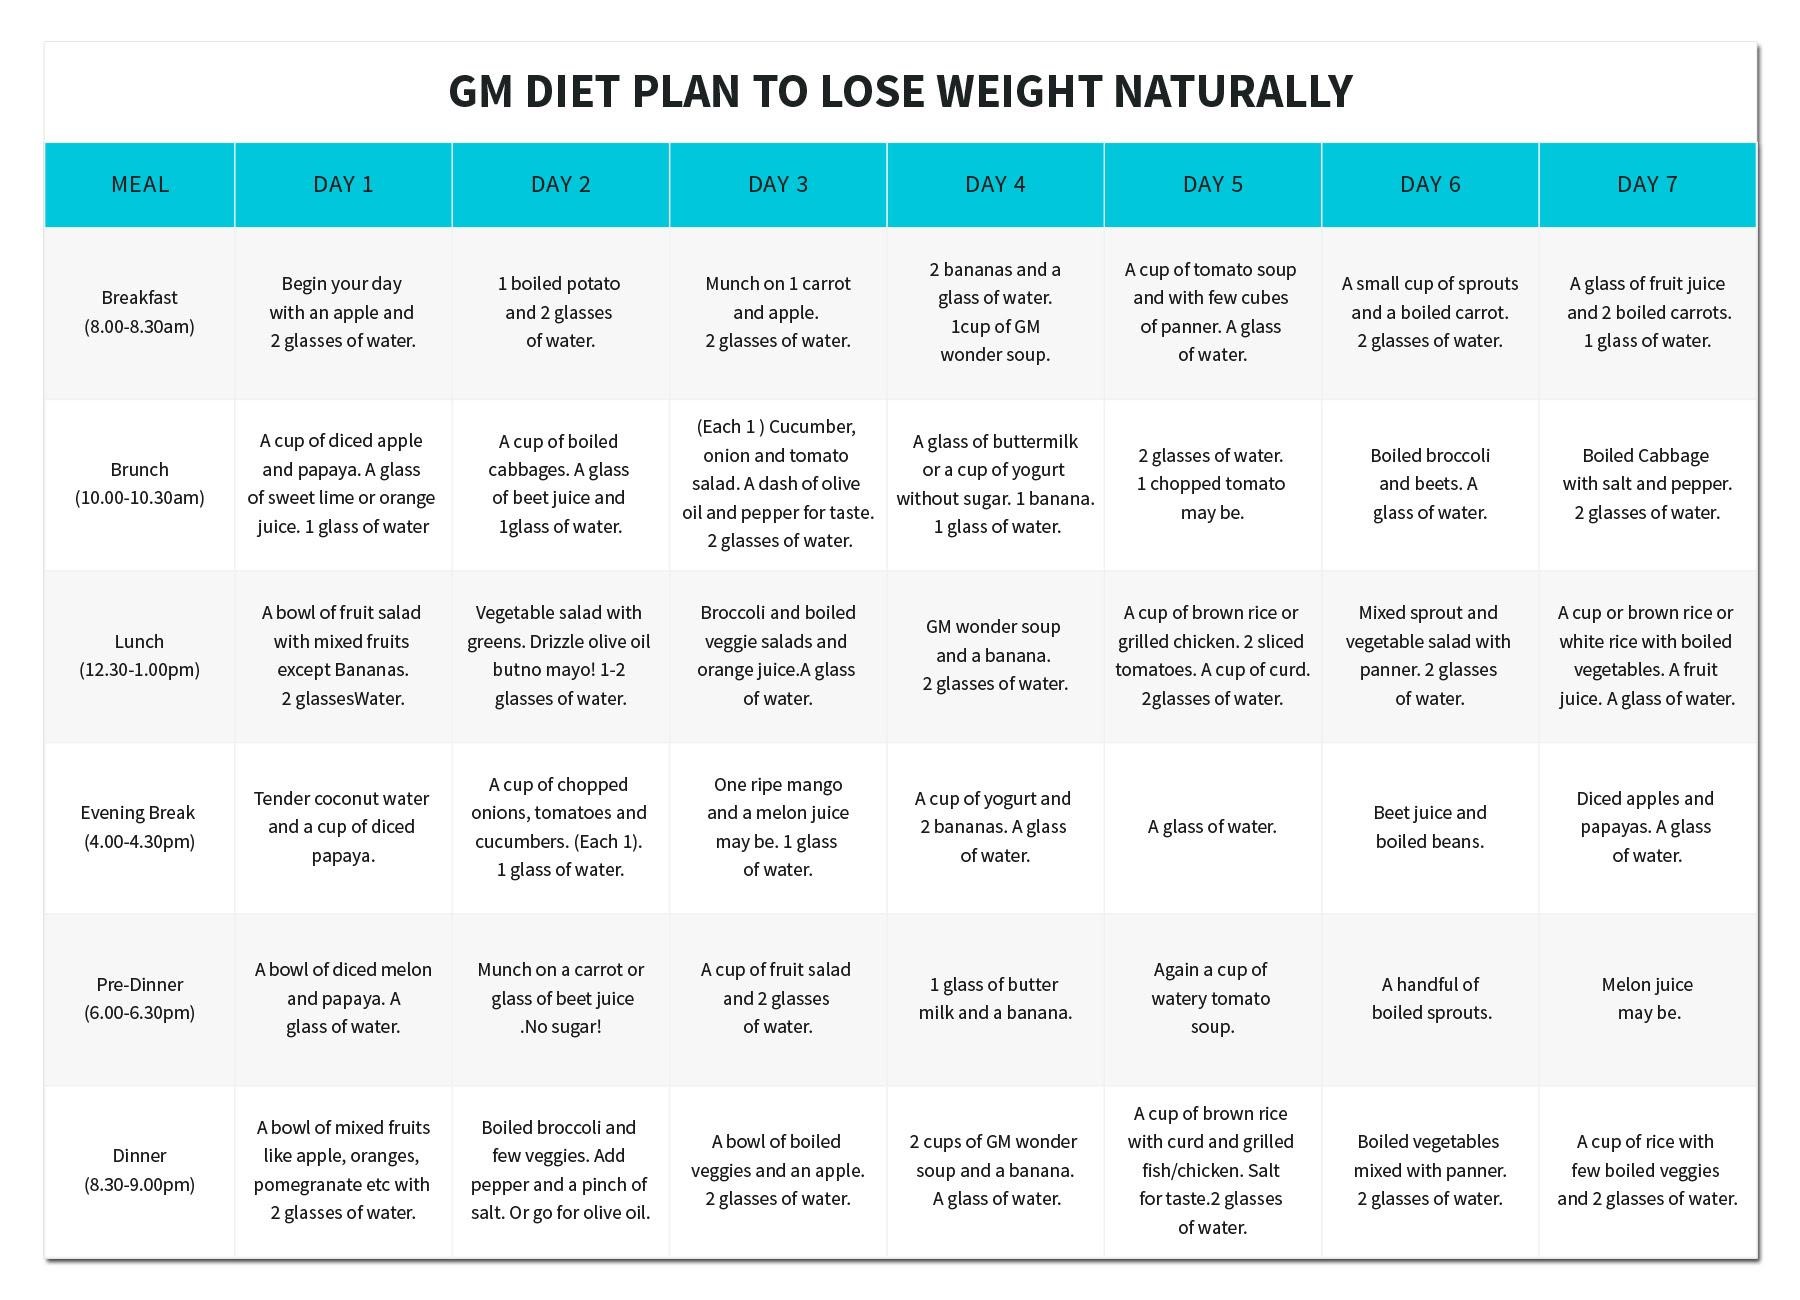 GM Diet Plan An Effective Way To Lose Weight WorthvieW